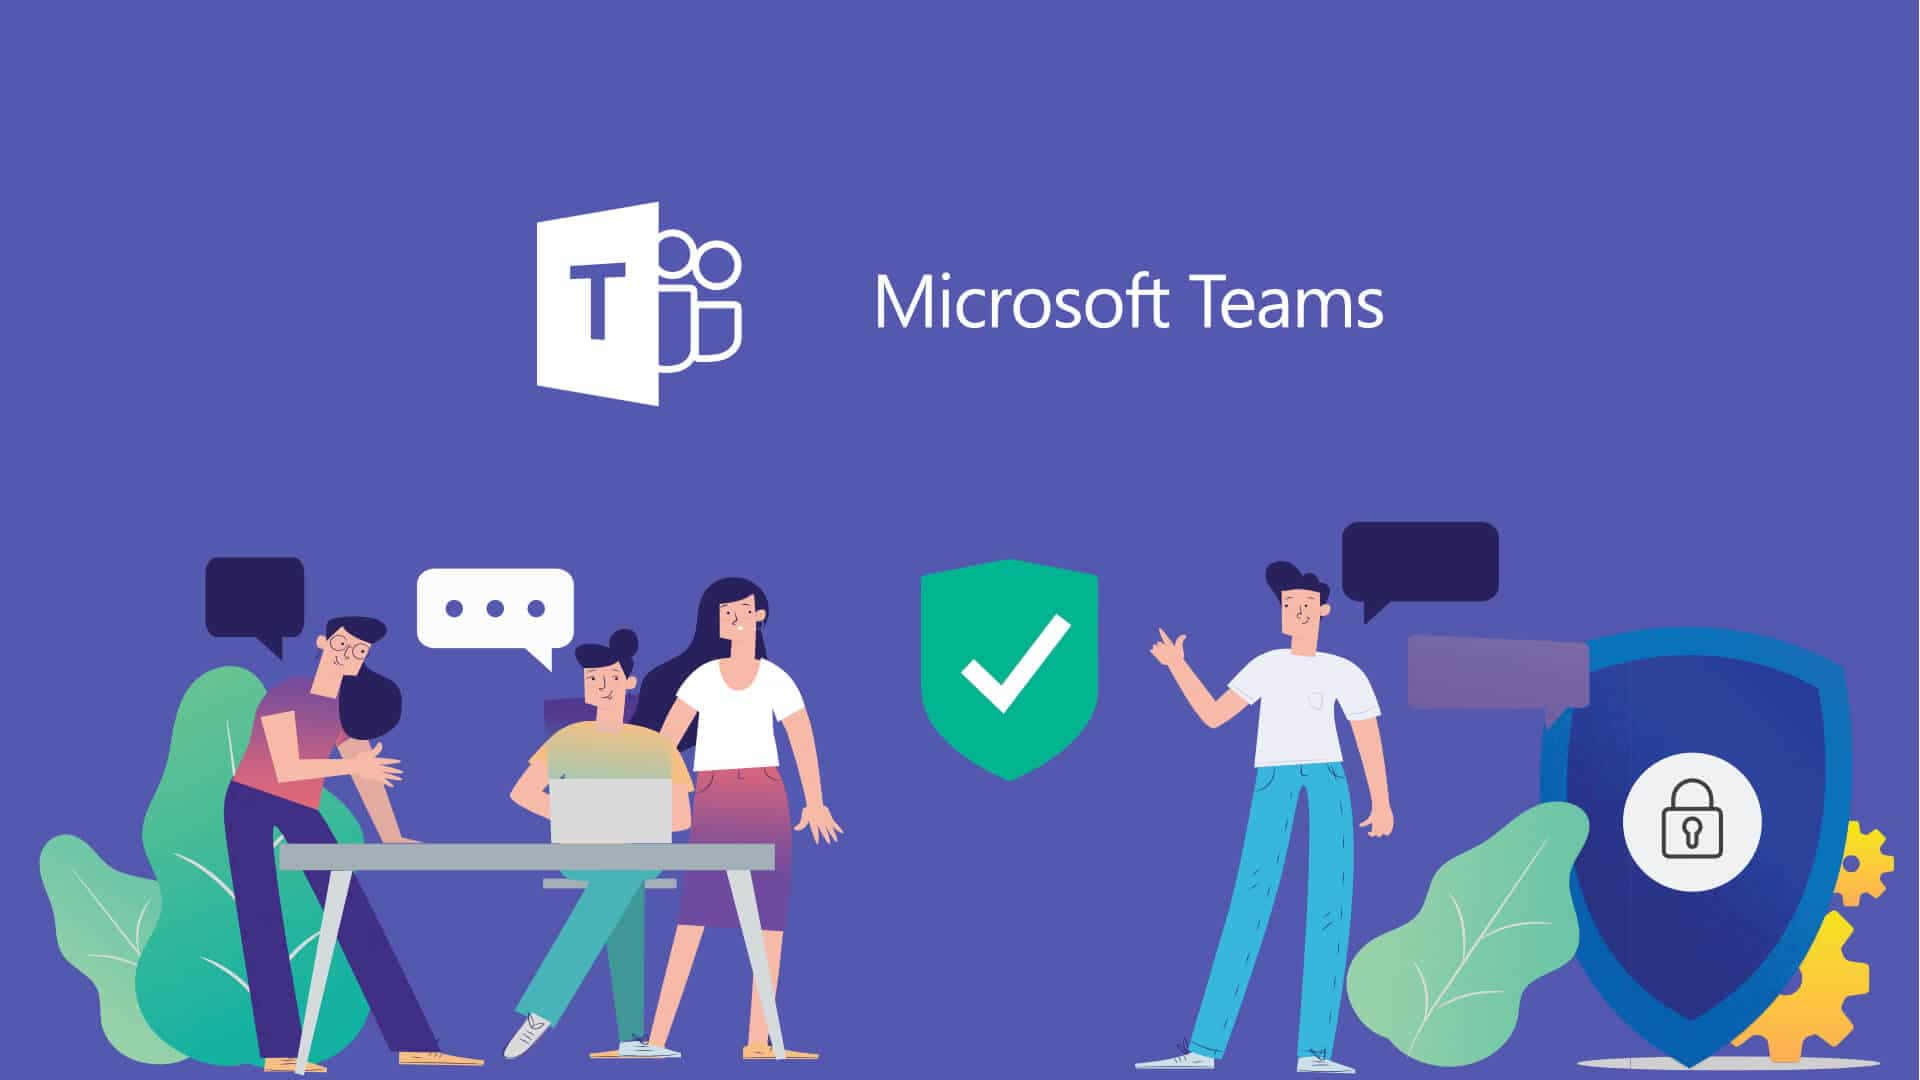 Microsoft Teams Unites Colleagues and Teams Around the World